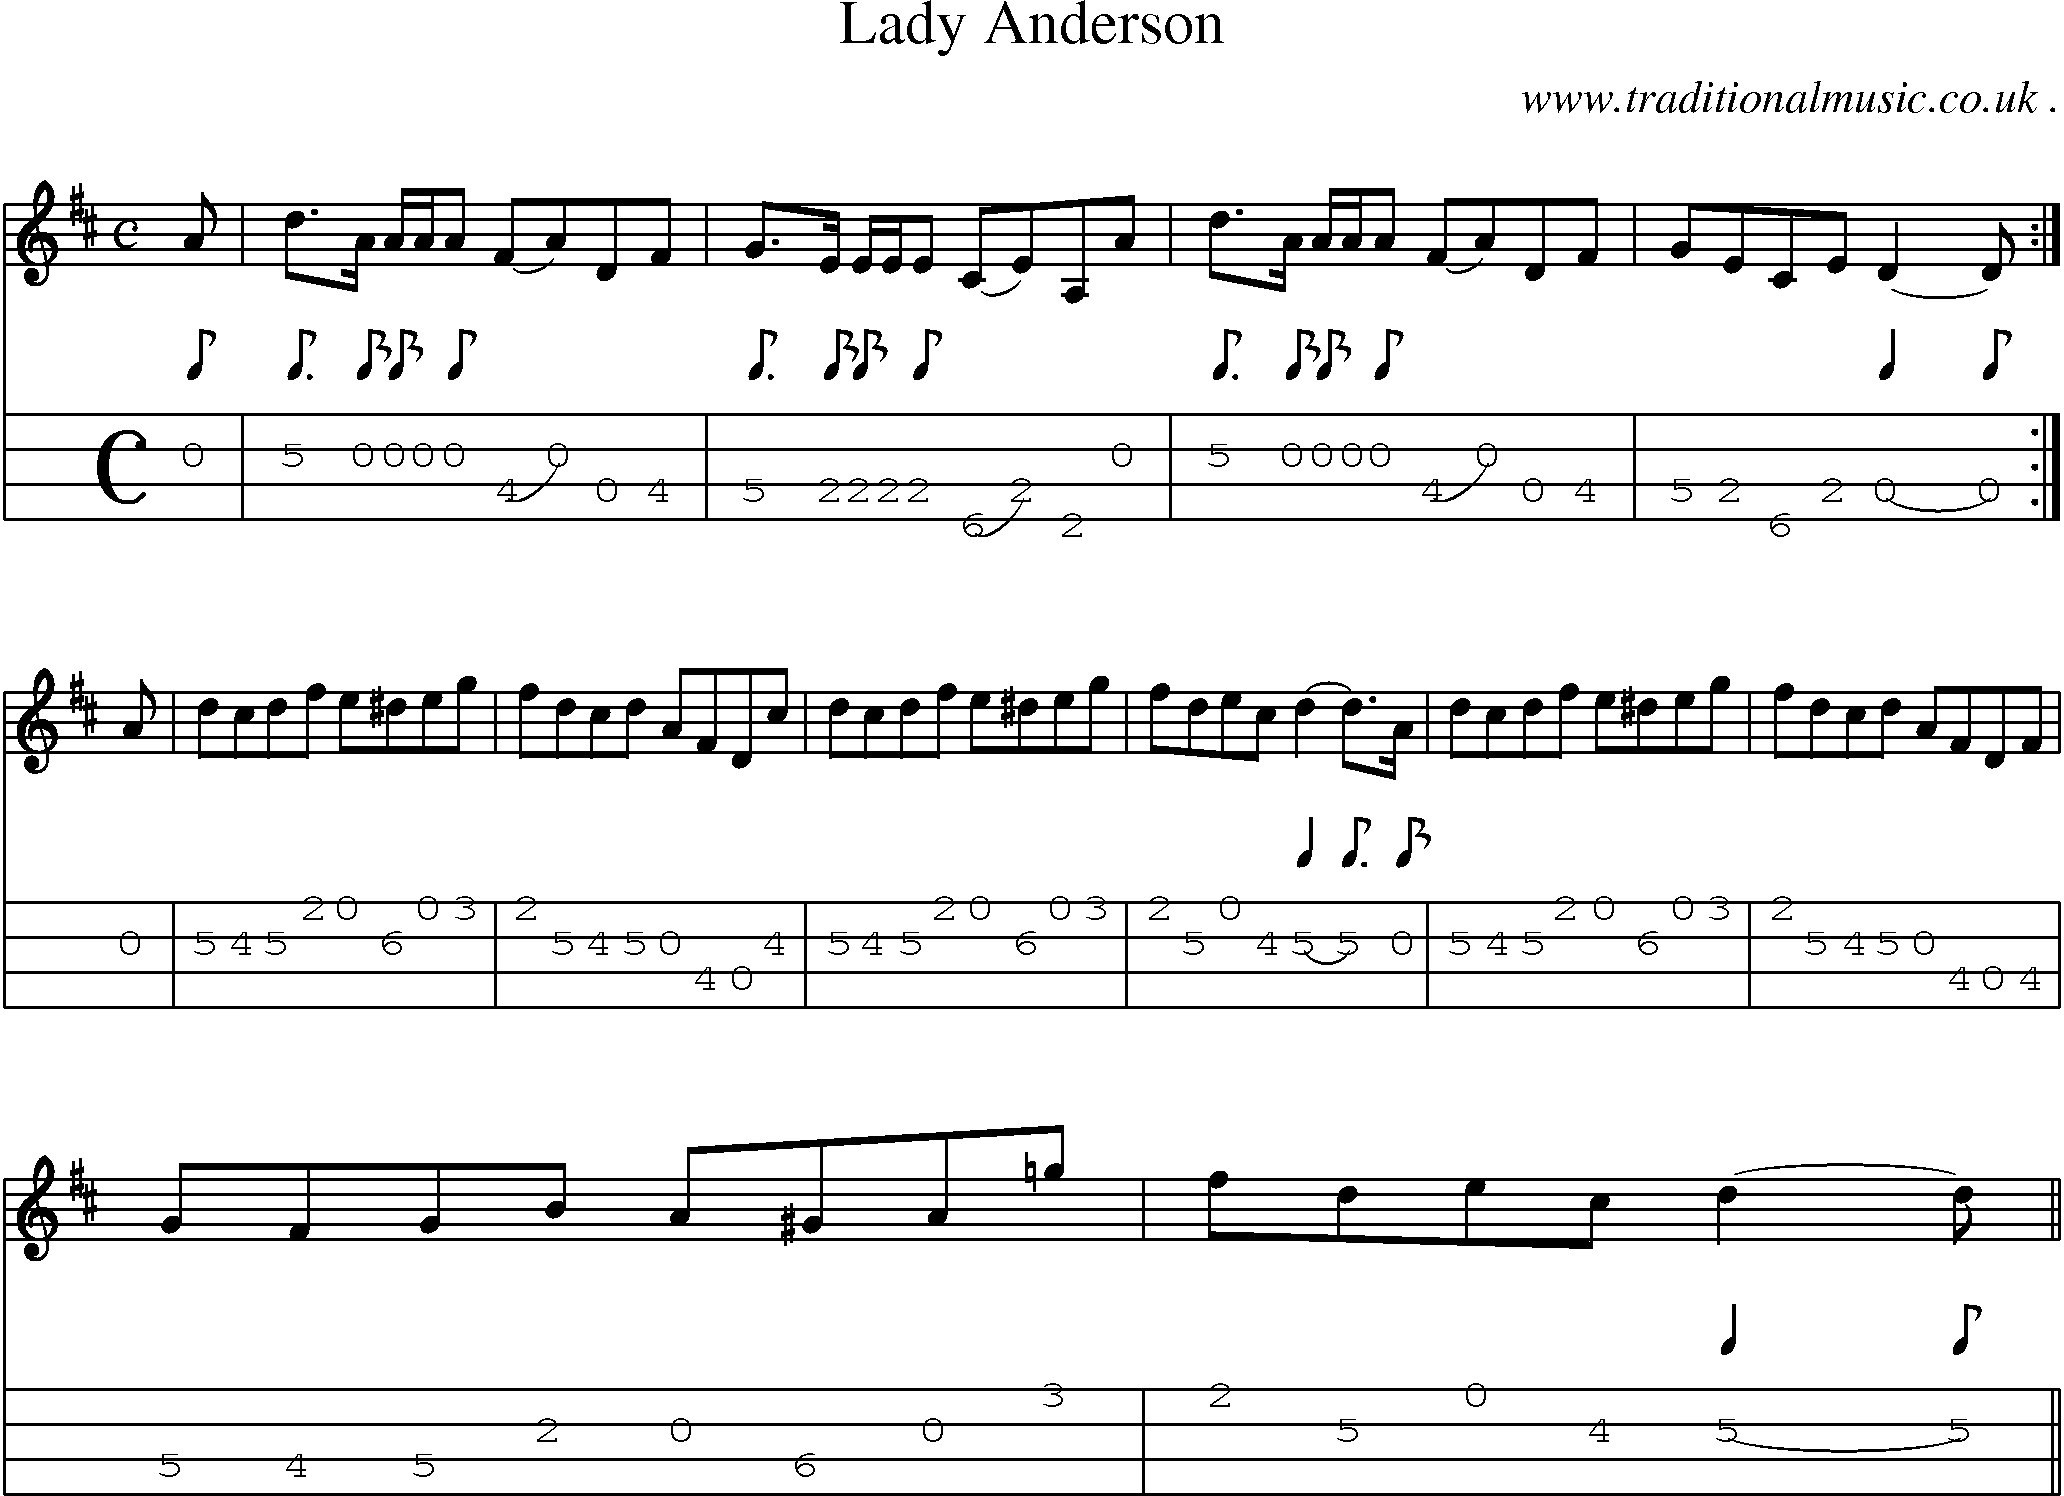 Sheet-music  score, Chords and Mandolin Tabs for Lady Anderson